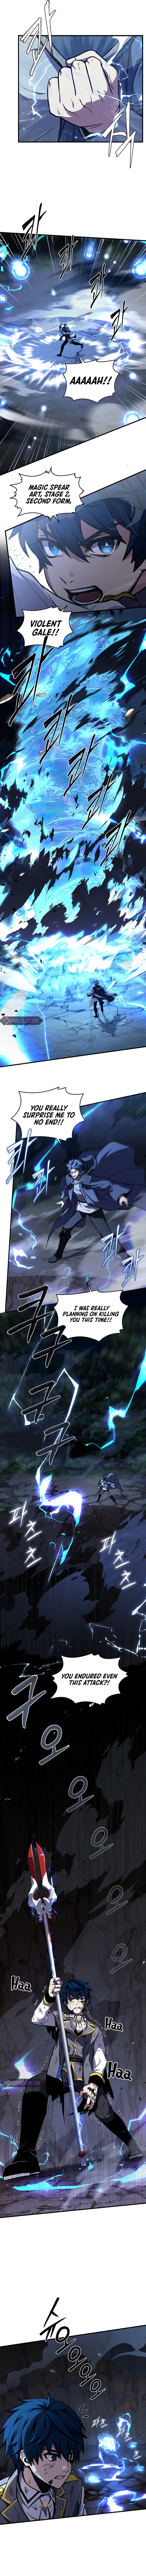 Return of the Legendary Spear Knight - Chapter 41 Page 6